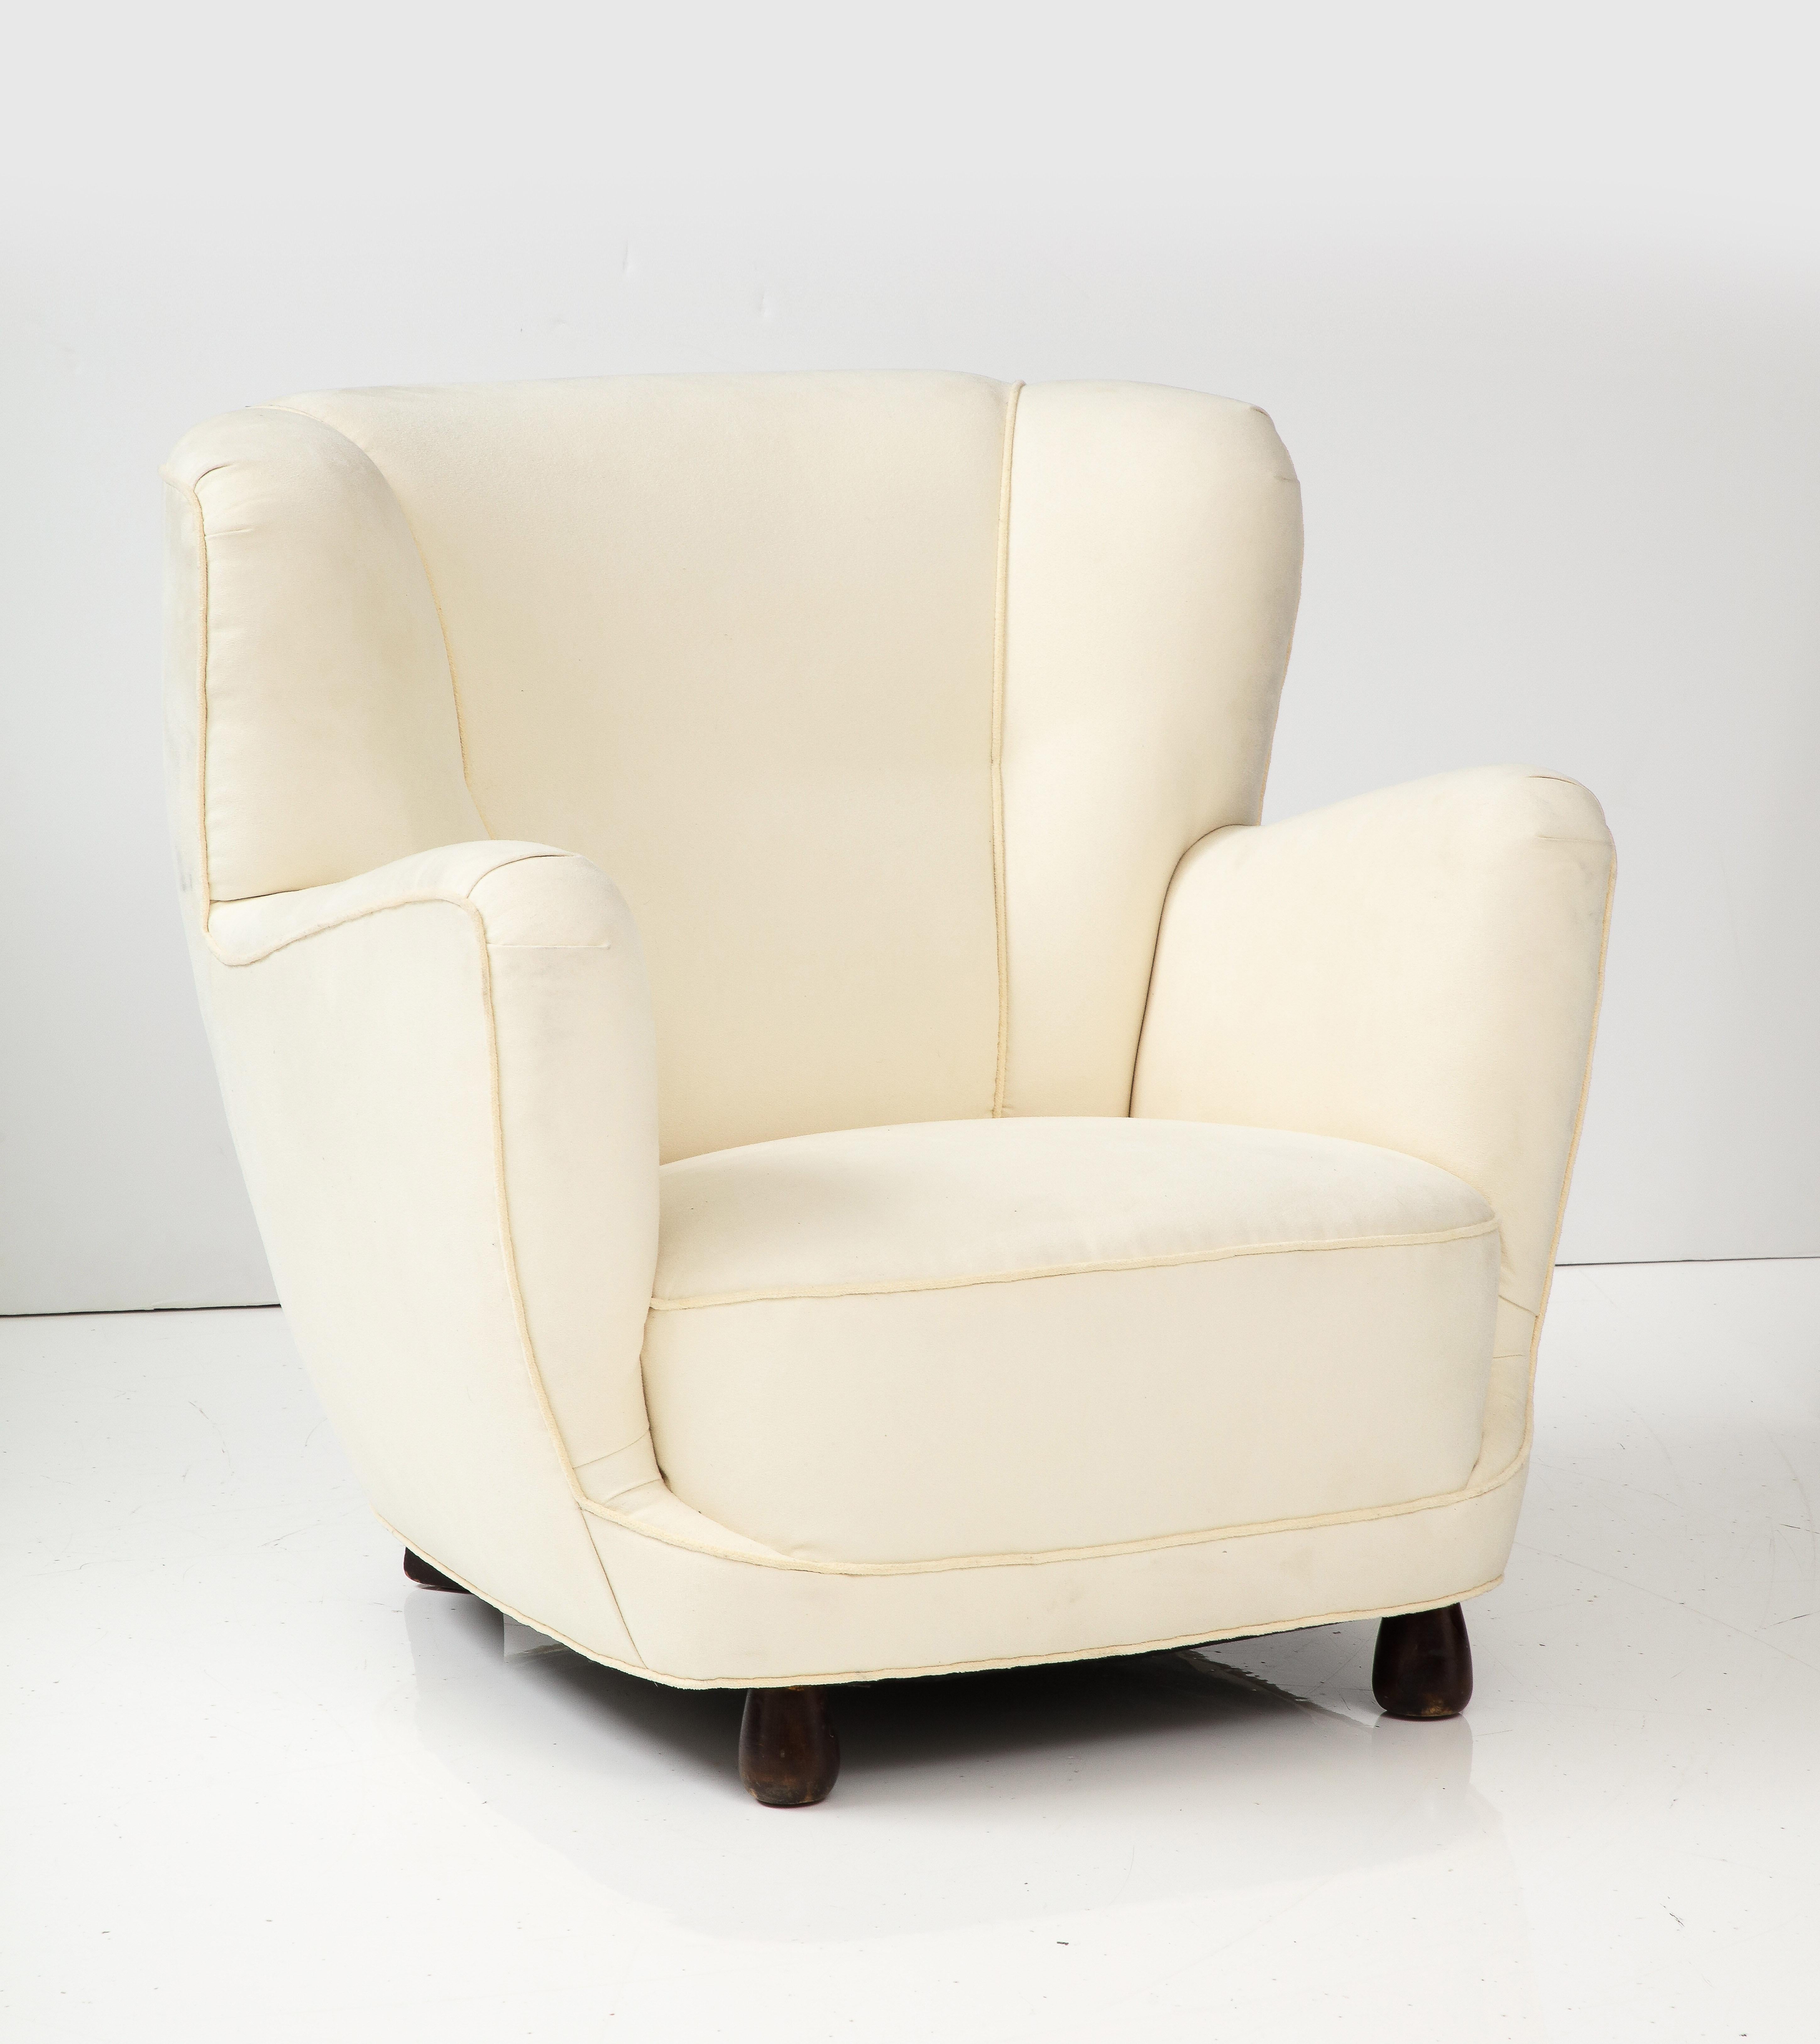 Danish Upholstered Club Chair in Muslin, 1940's For Sale 4